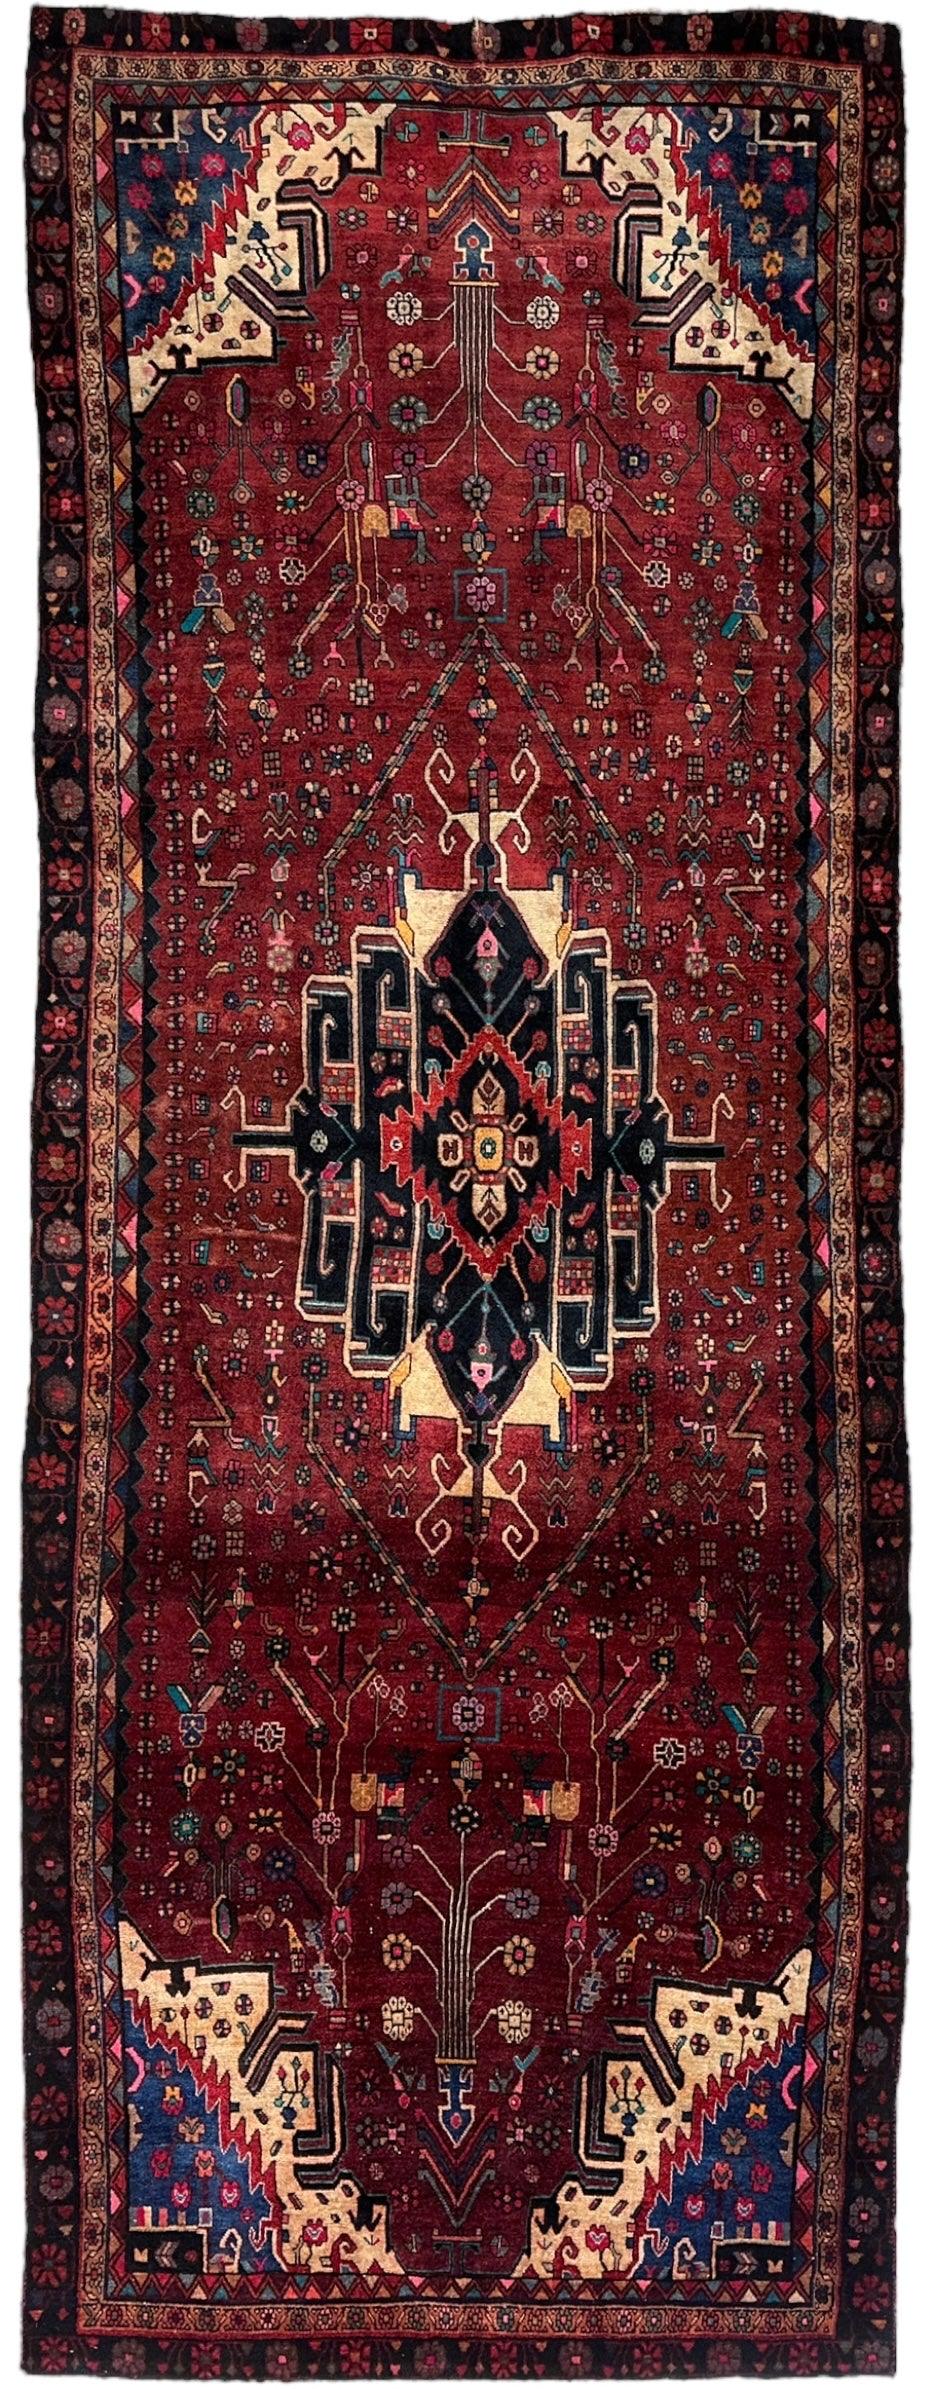 4'2” x 11’4” Hand Knotted Farahan Persian Wool Runner Rug